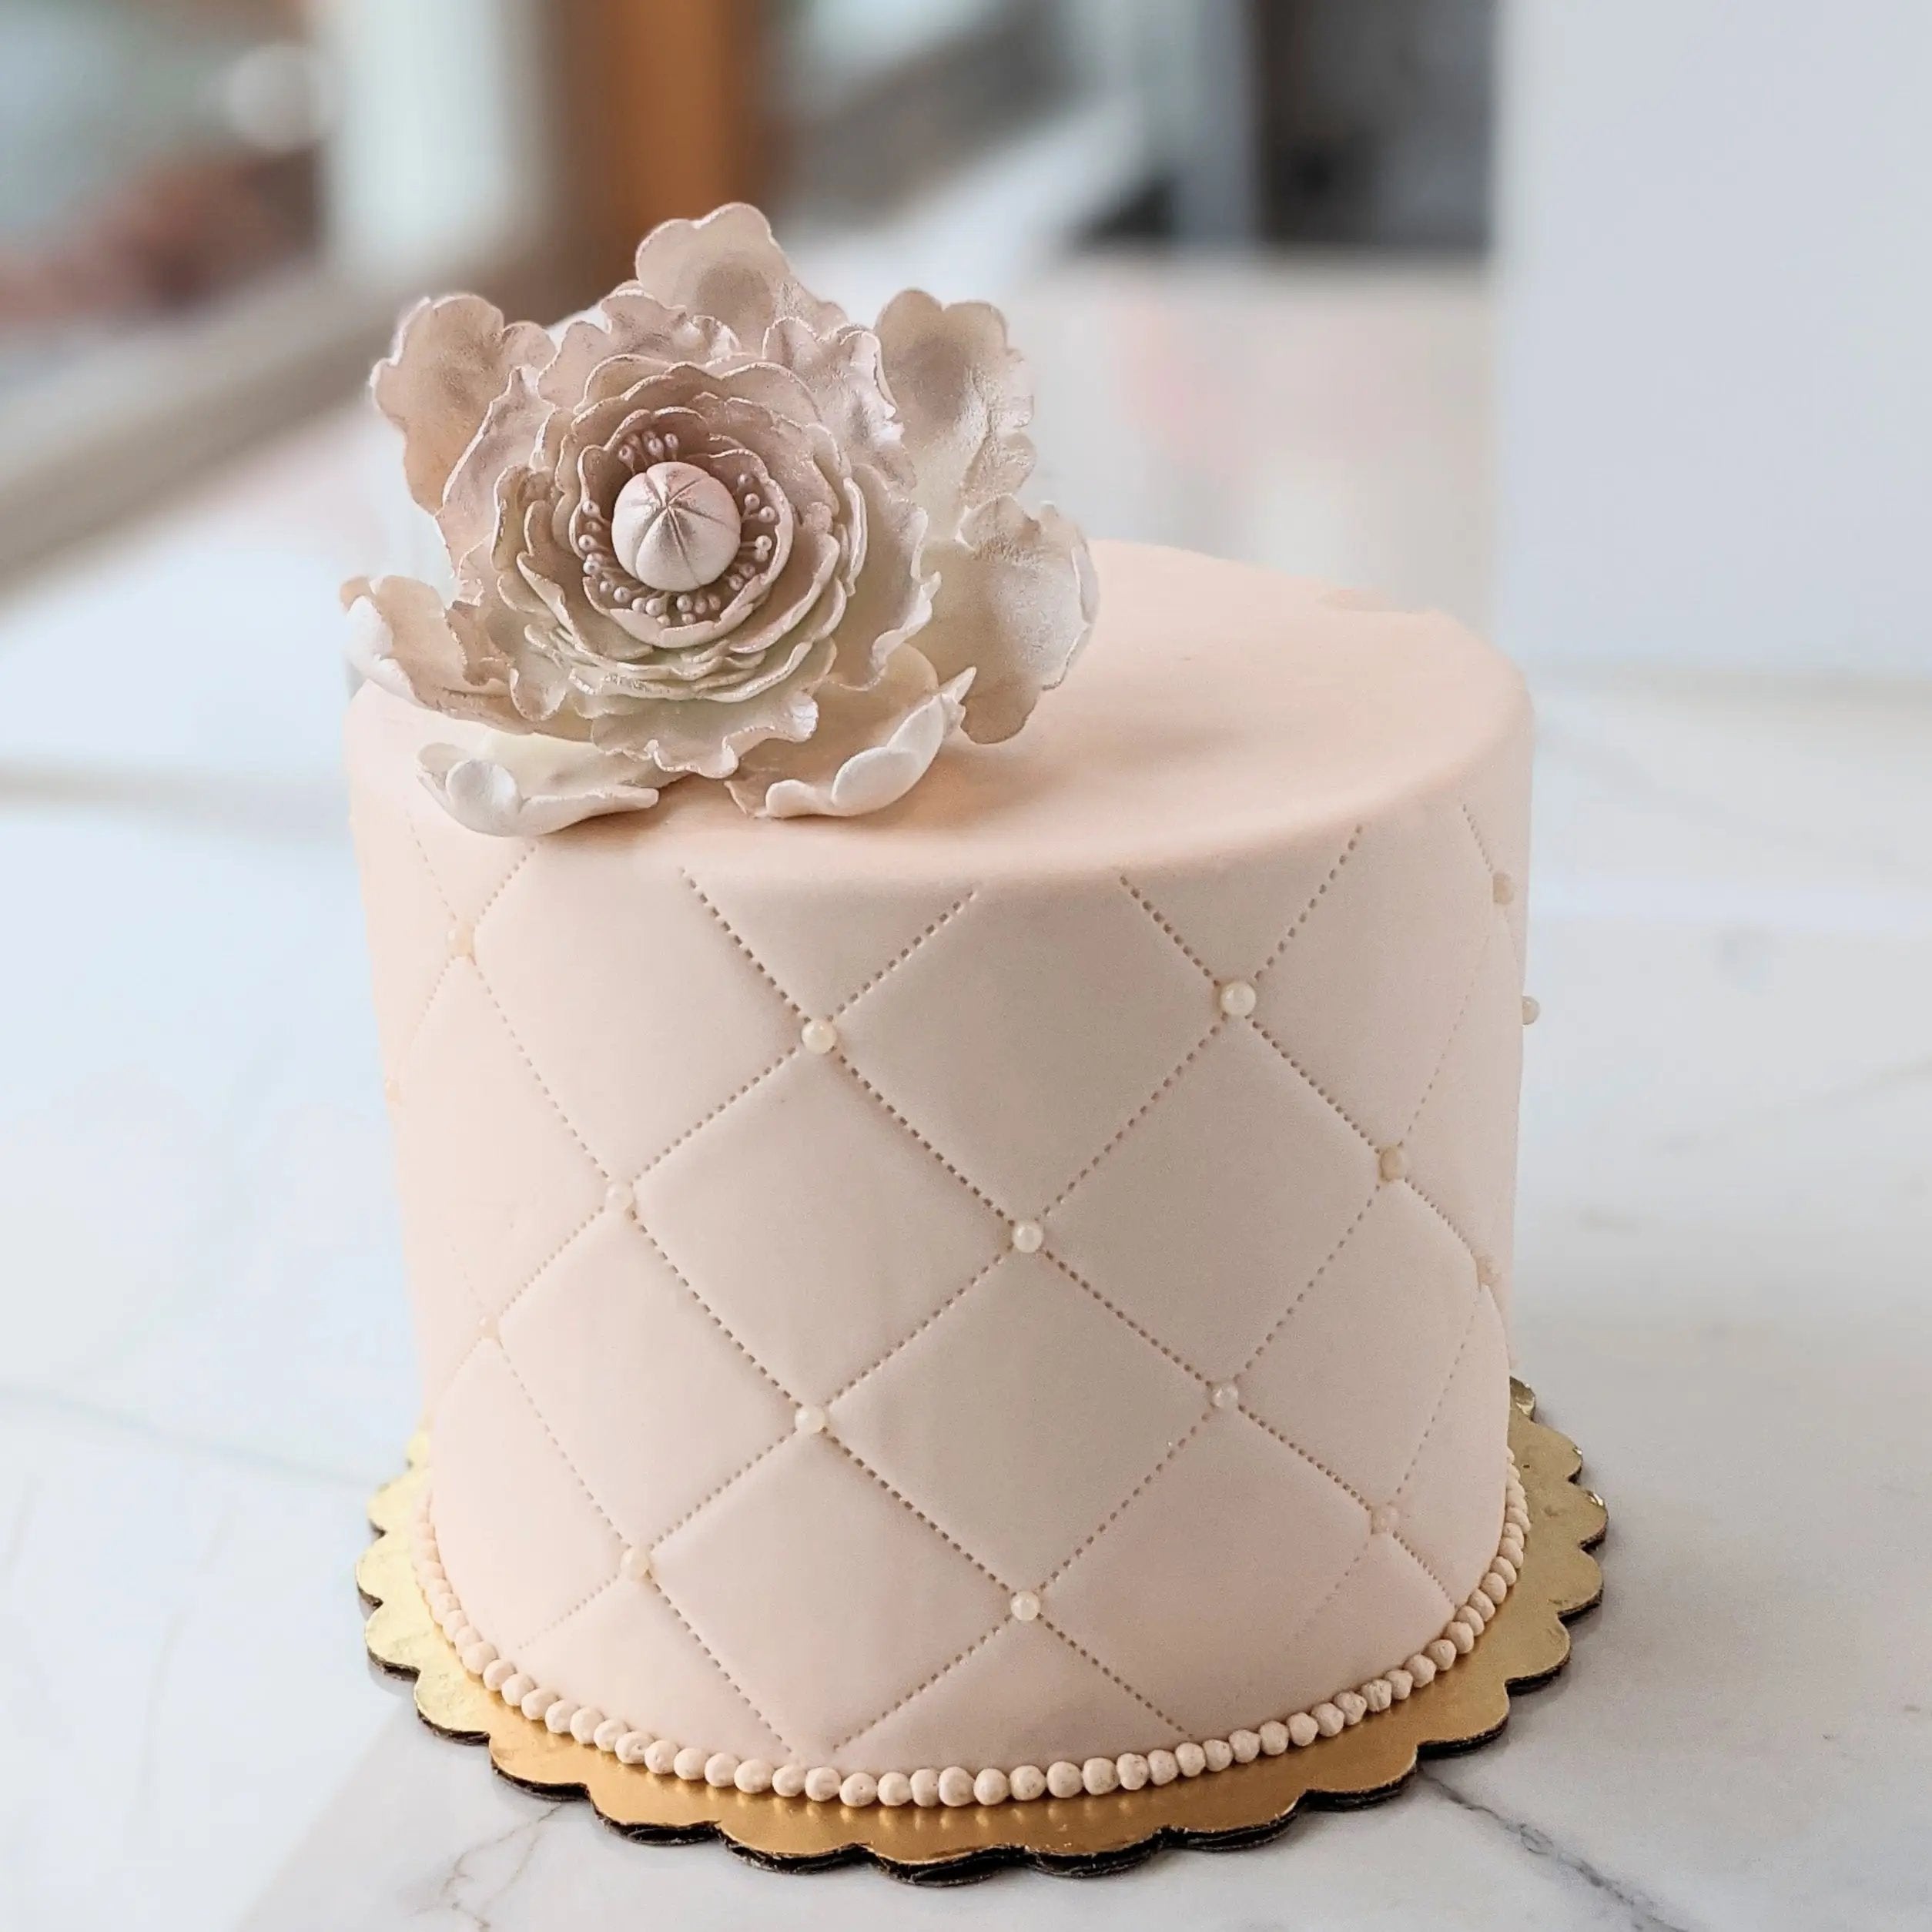 Quilted Floral Cake